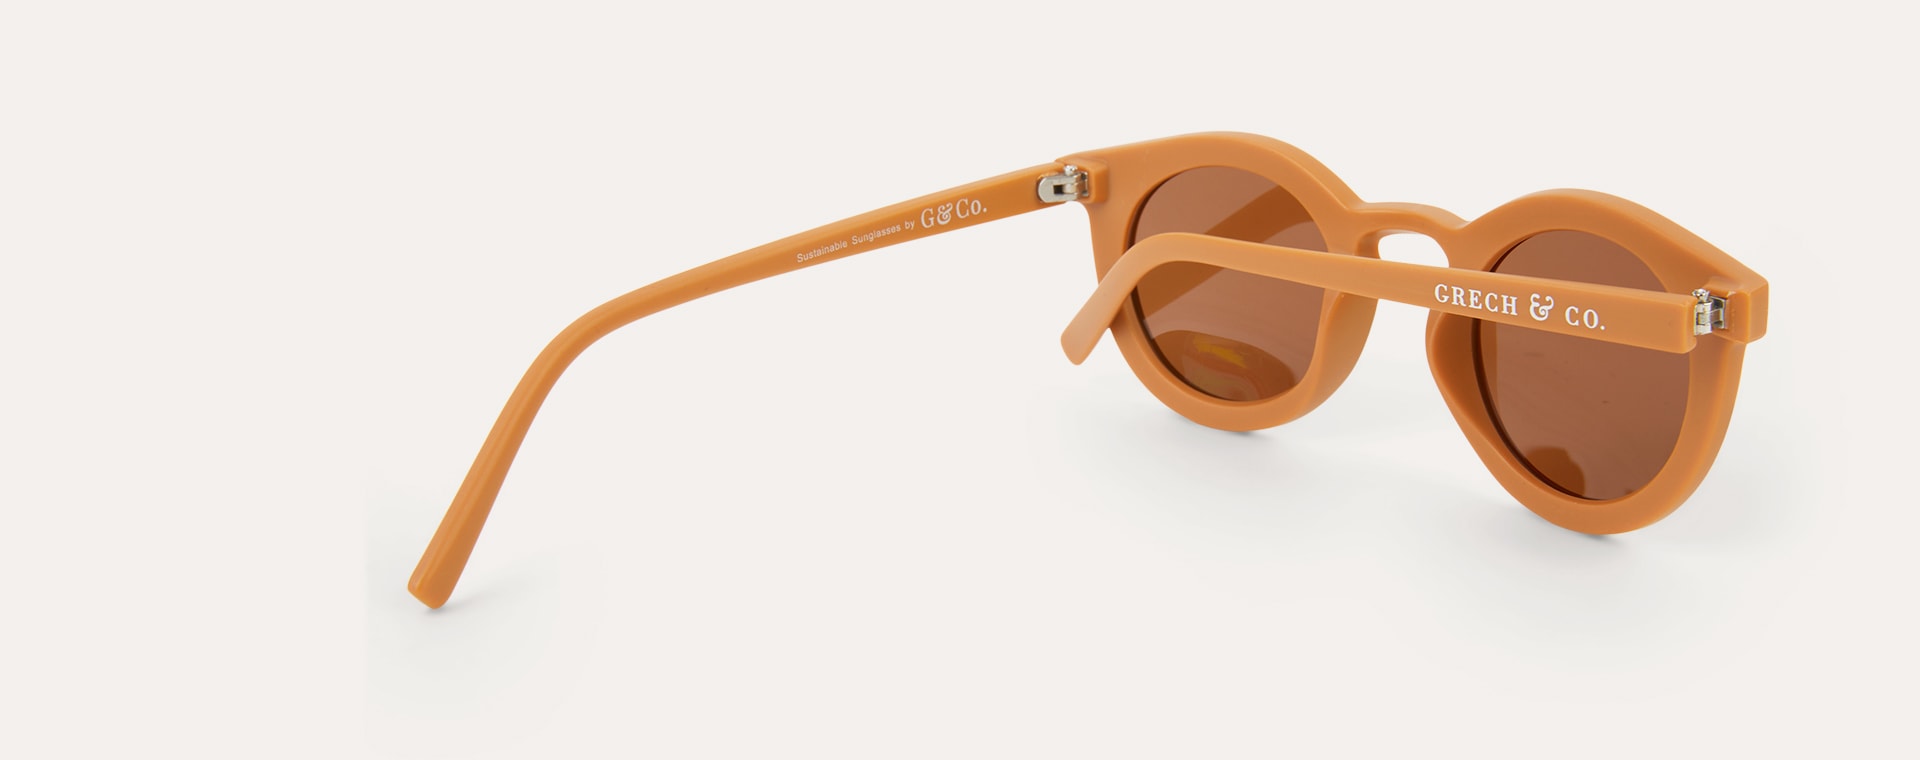 Spice+Buff Grech & Co New Sustainable Sunglasses